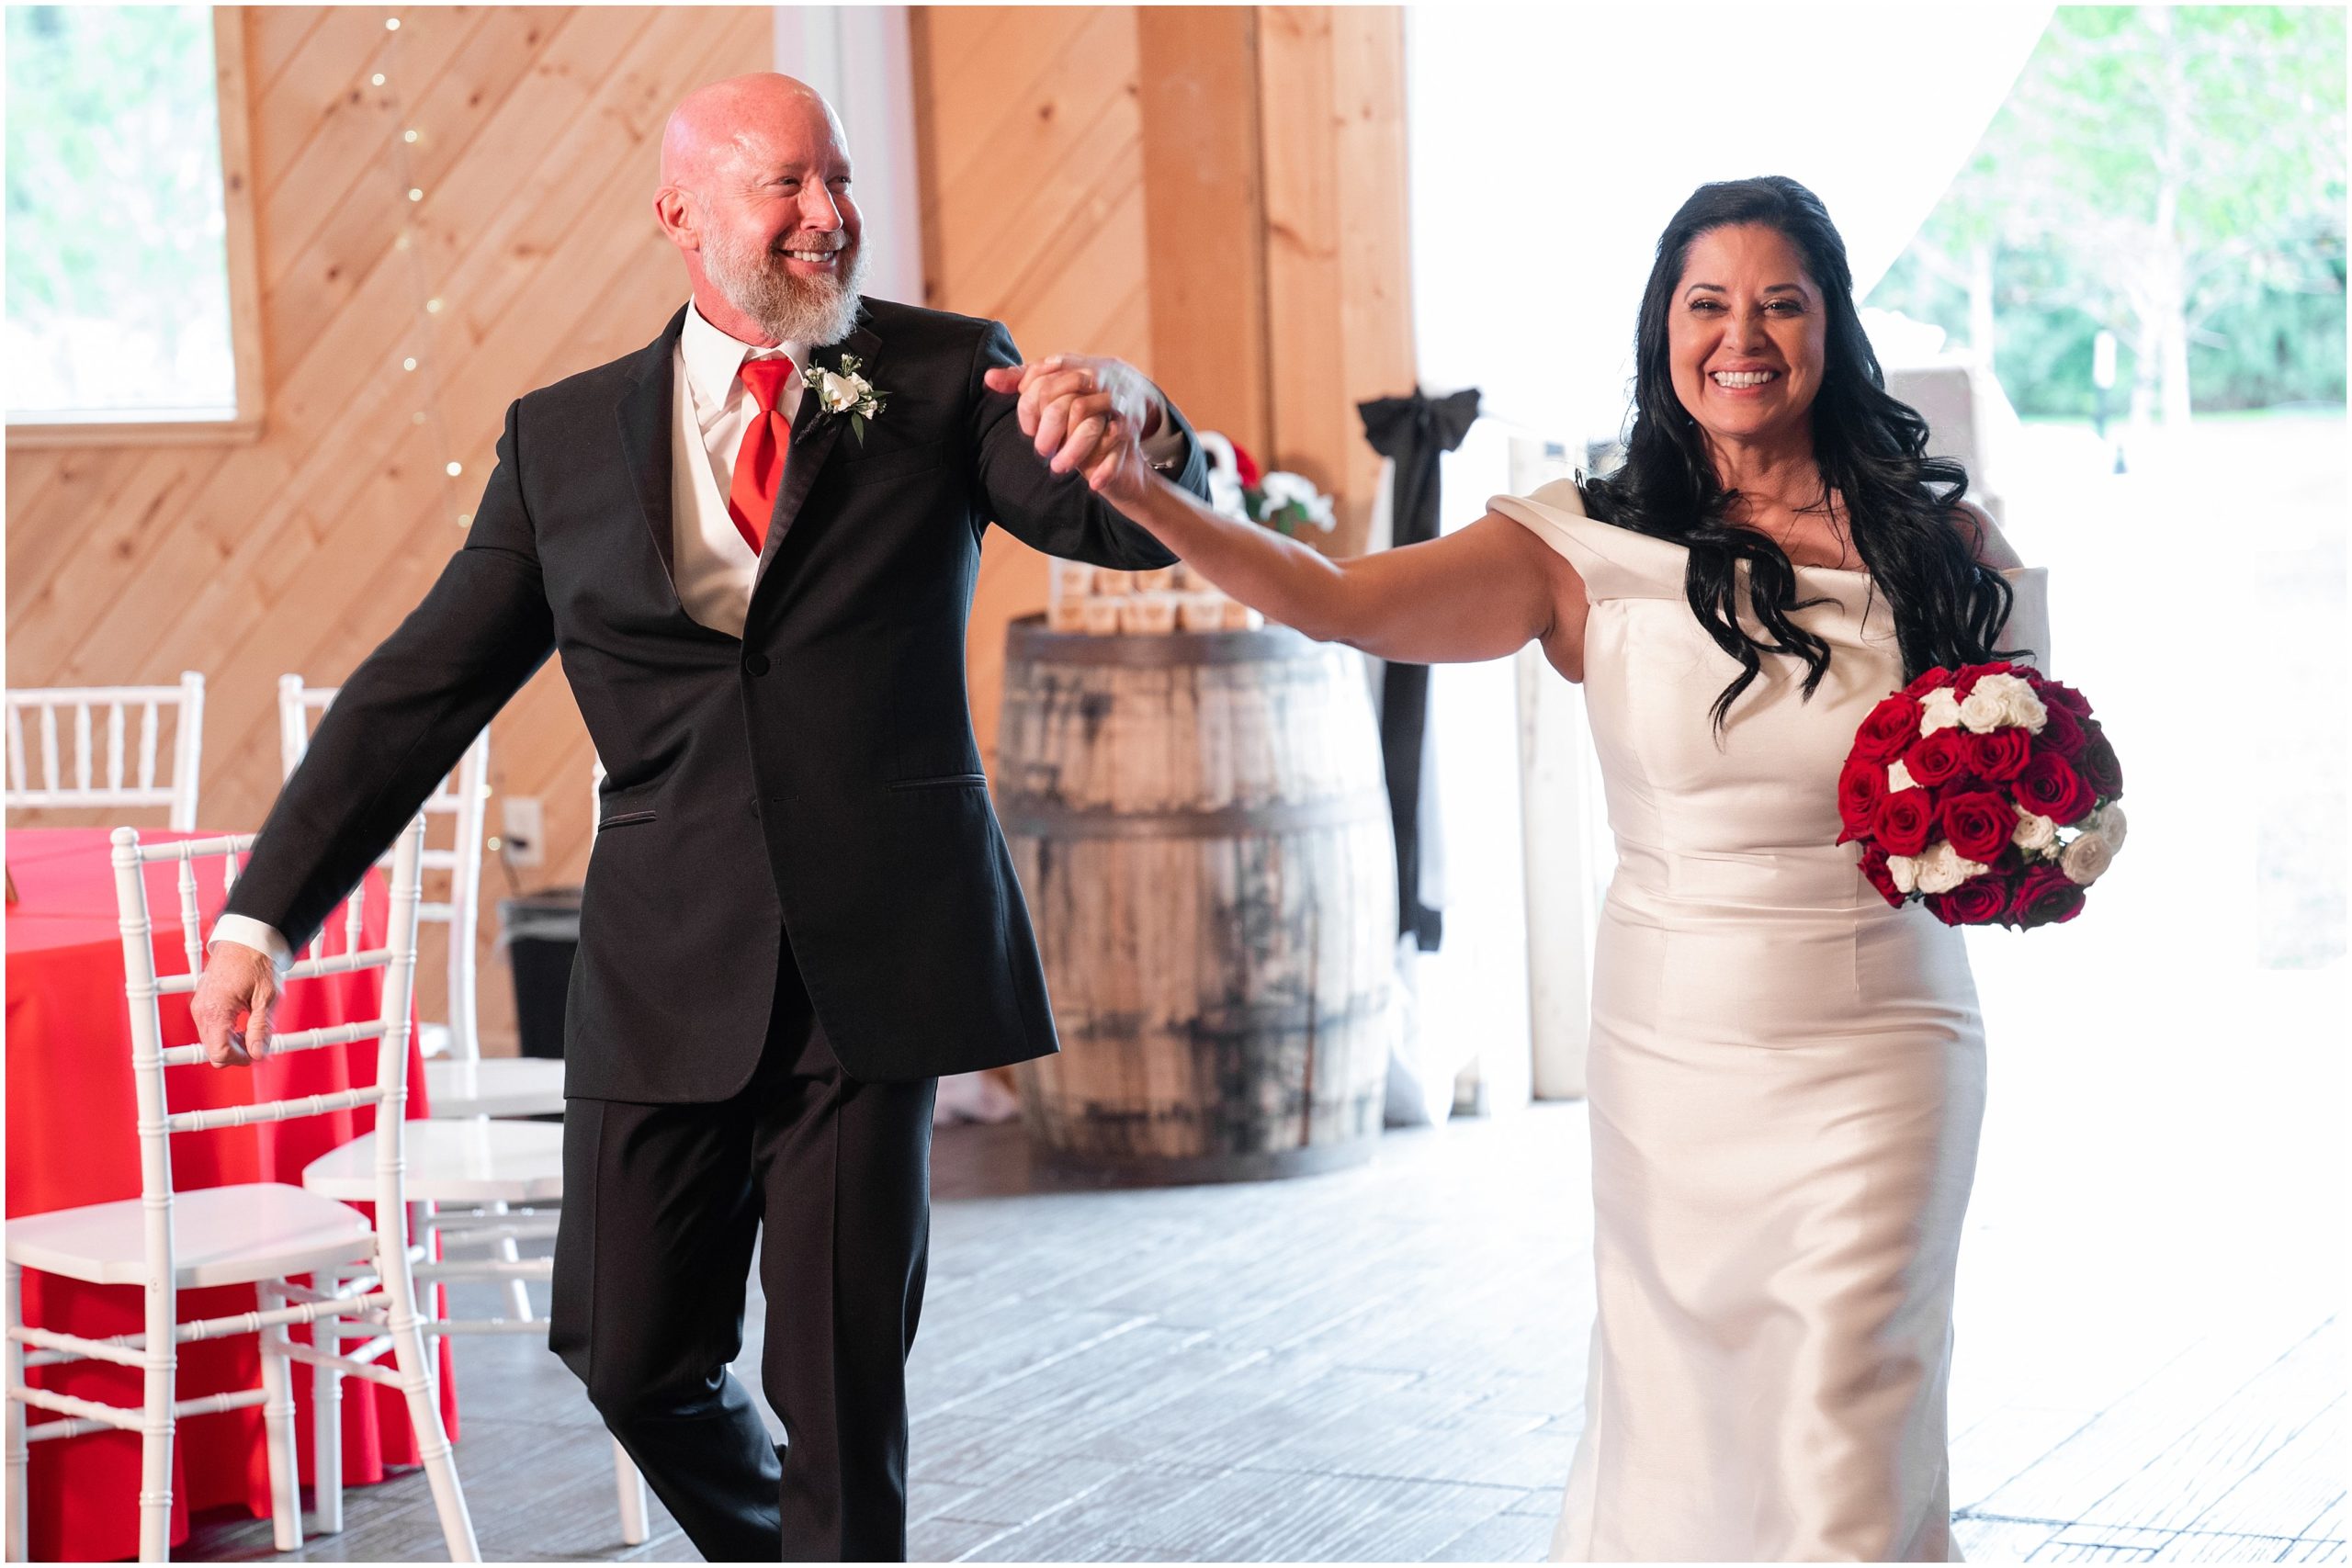 Bride and groom grand entrance and first dance in rustic barn | Red and Black Oak Hills Utah Spring Wedding | Jessie and Dallin Photography